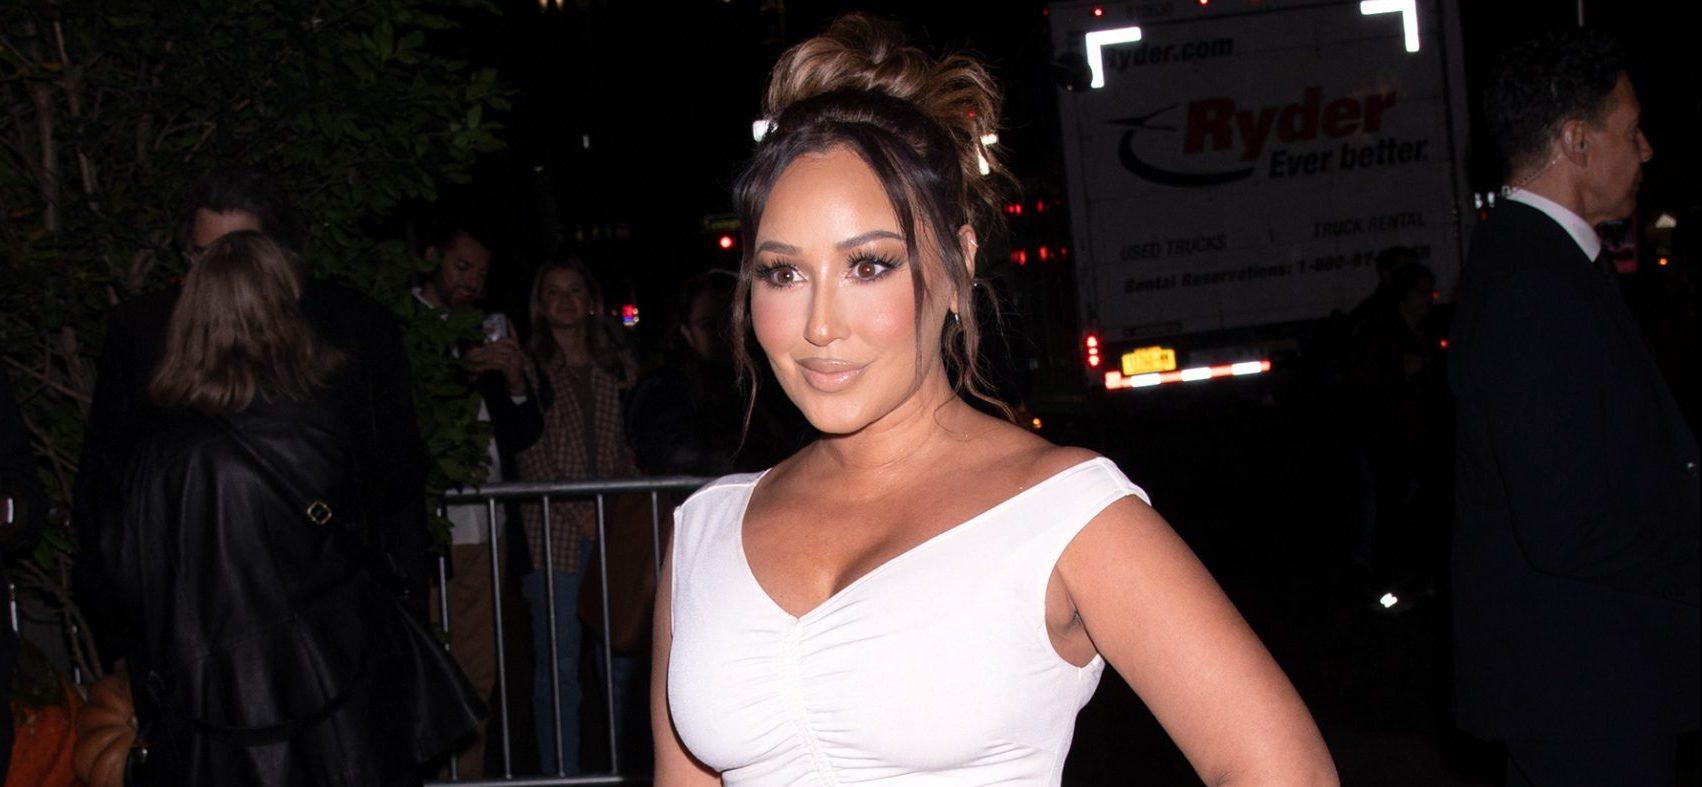 Adrienne Bailon Gets Hearts Racing In Curve-Hugging Skimpy Black Dress At NYFW